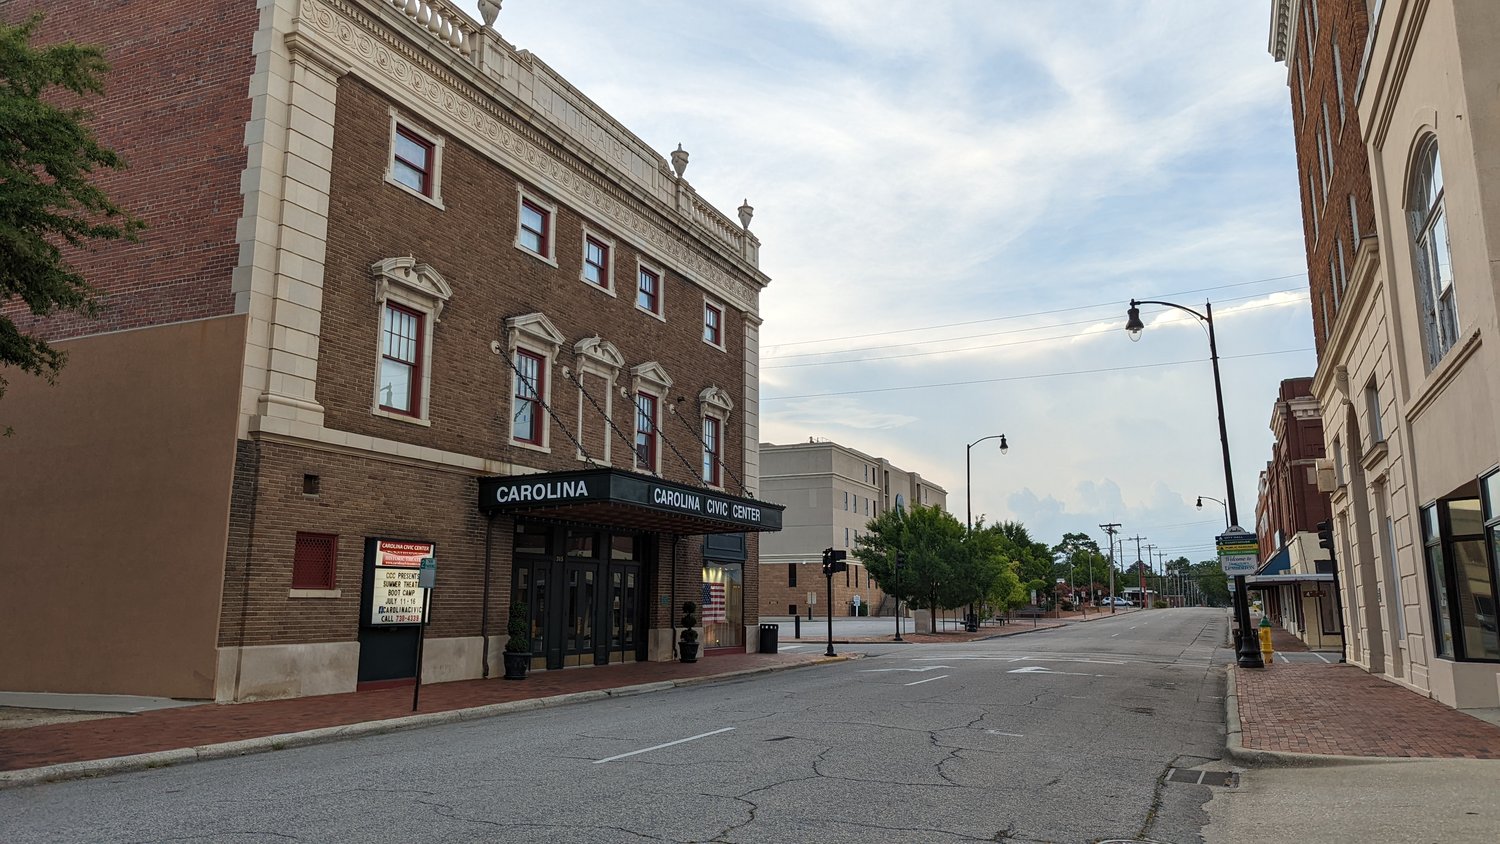 The Carolina Civic Center in downtown Lumberton is set to be expanded using American Rescue Plan funding.